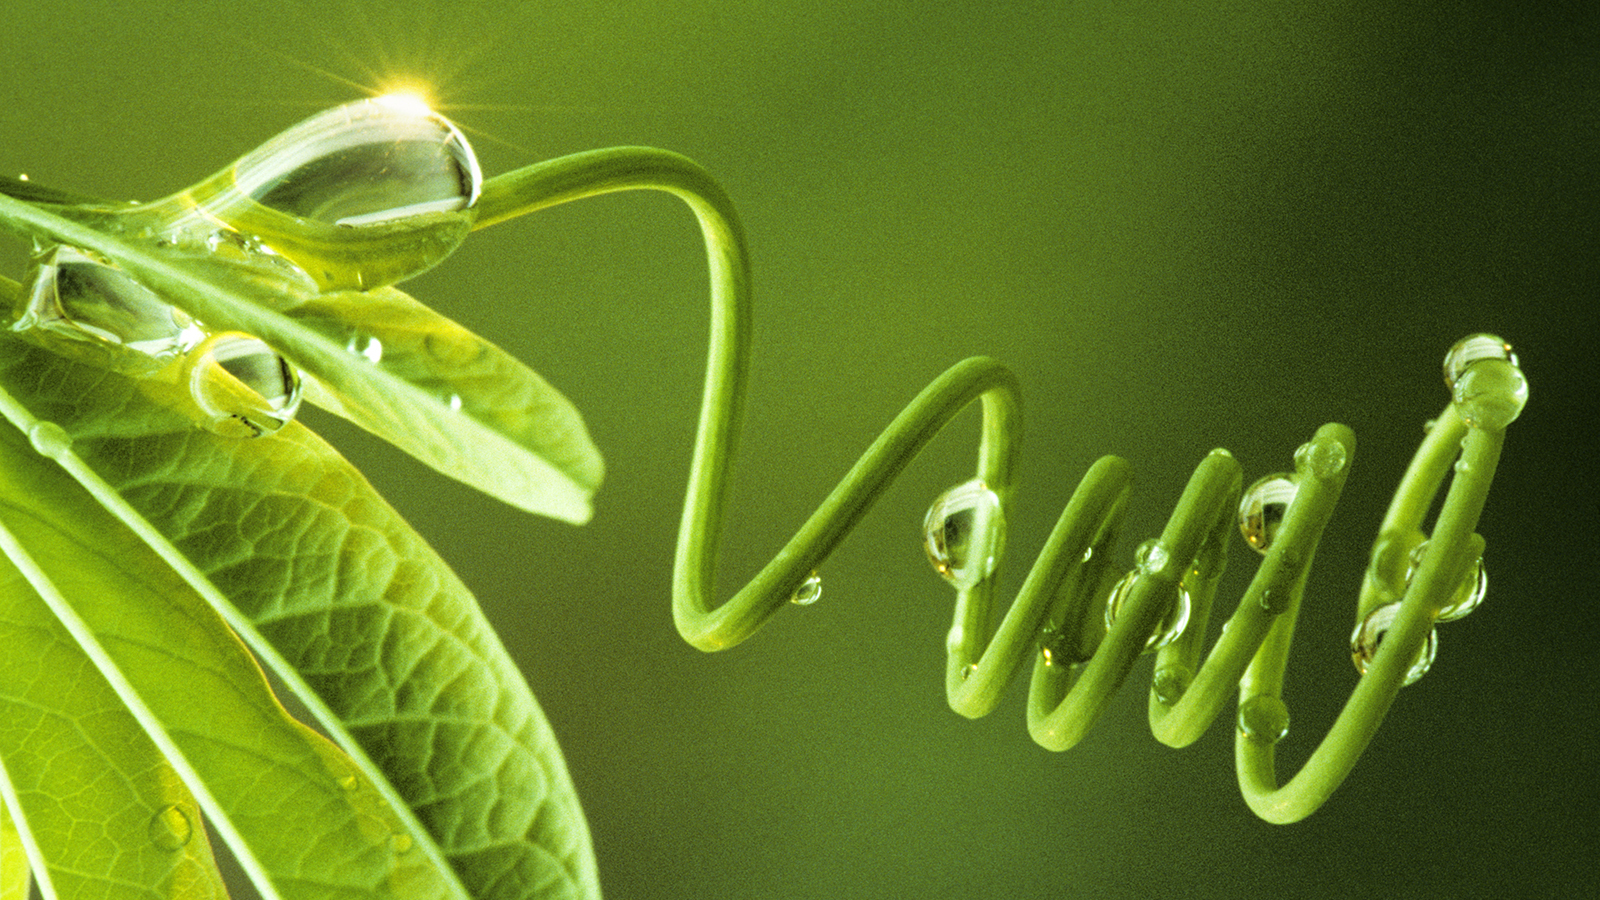 Breakthrough in photosynthesis boosts plant growth up to 30%